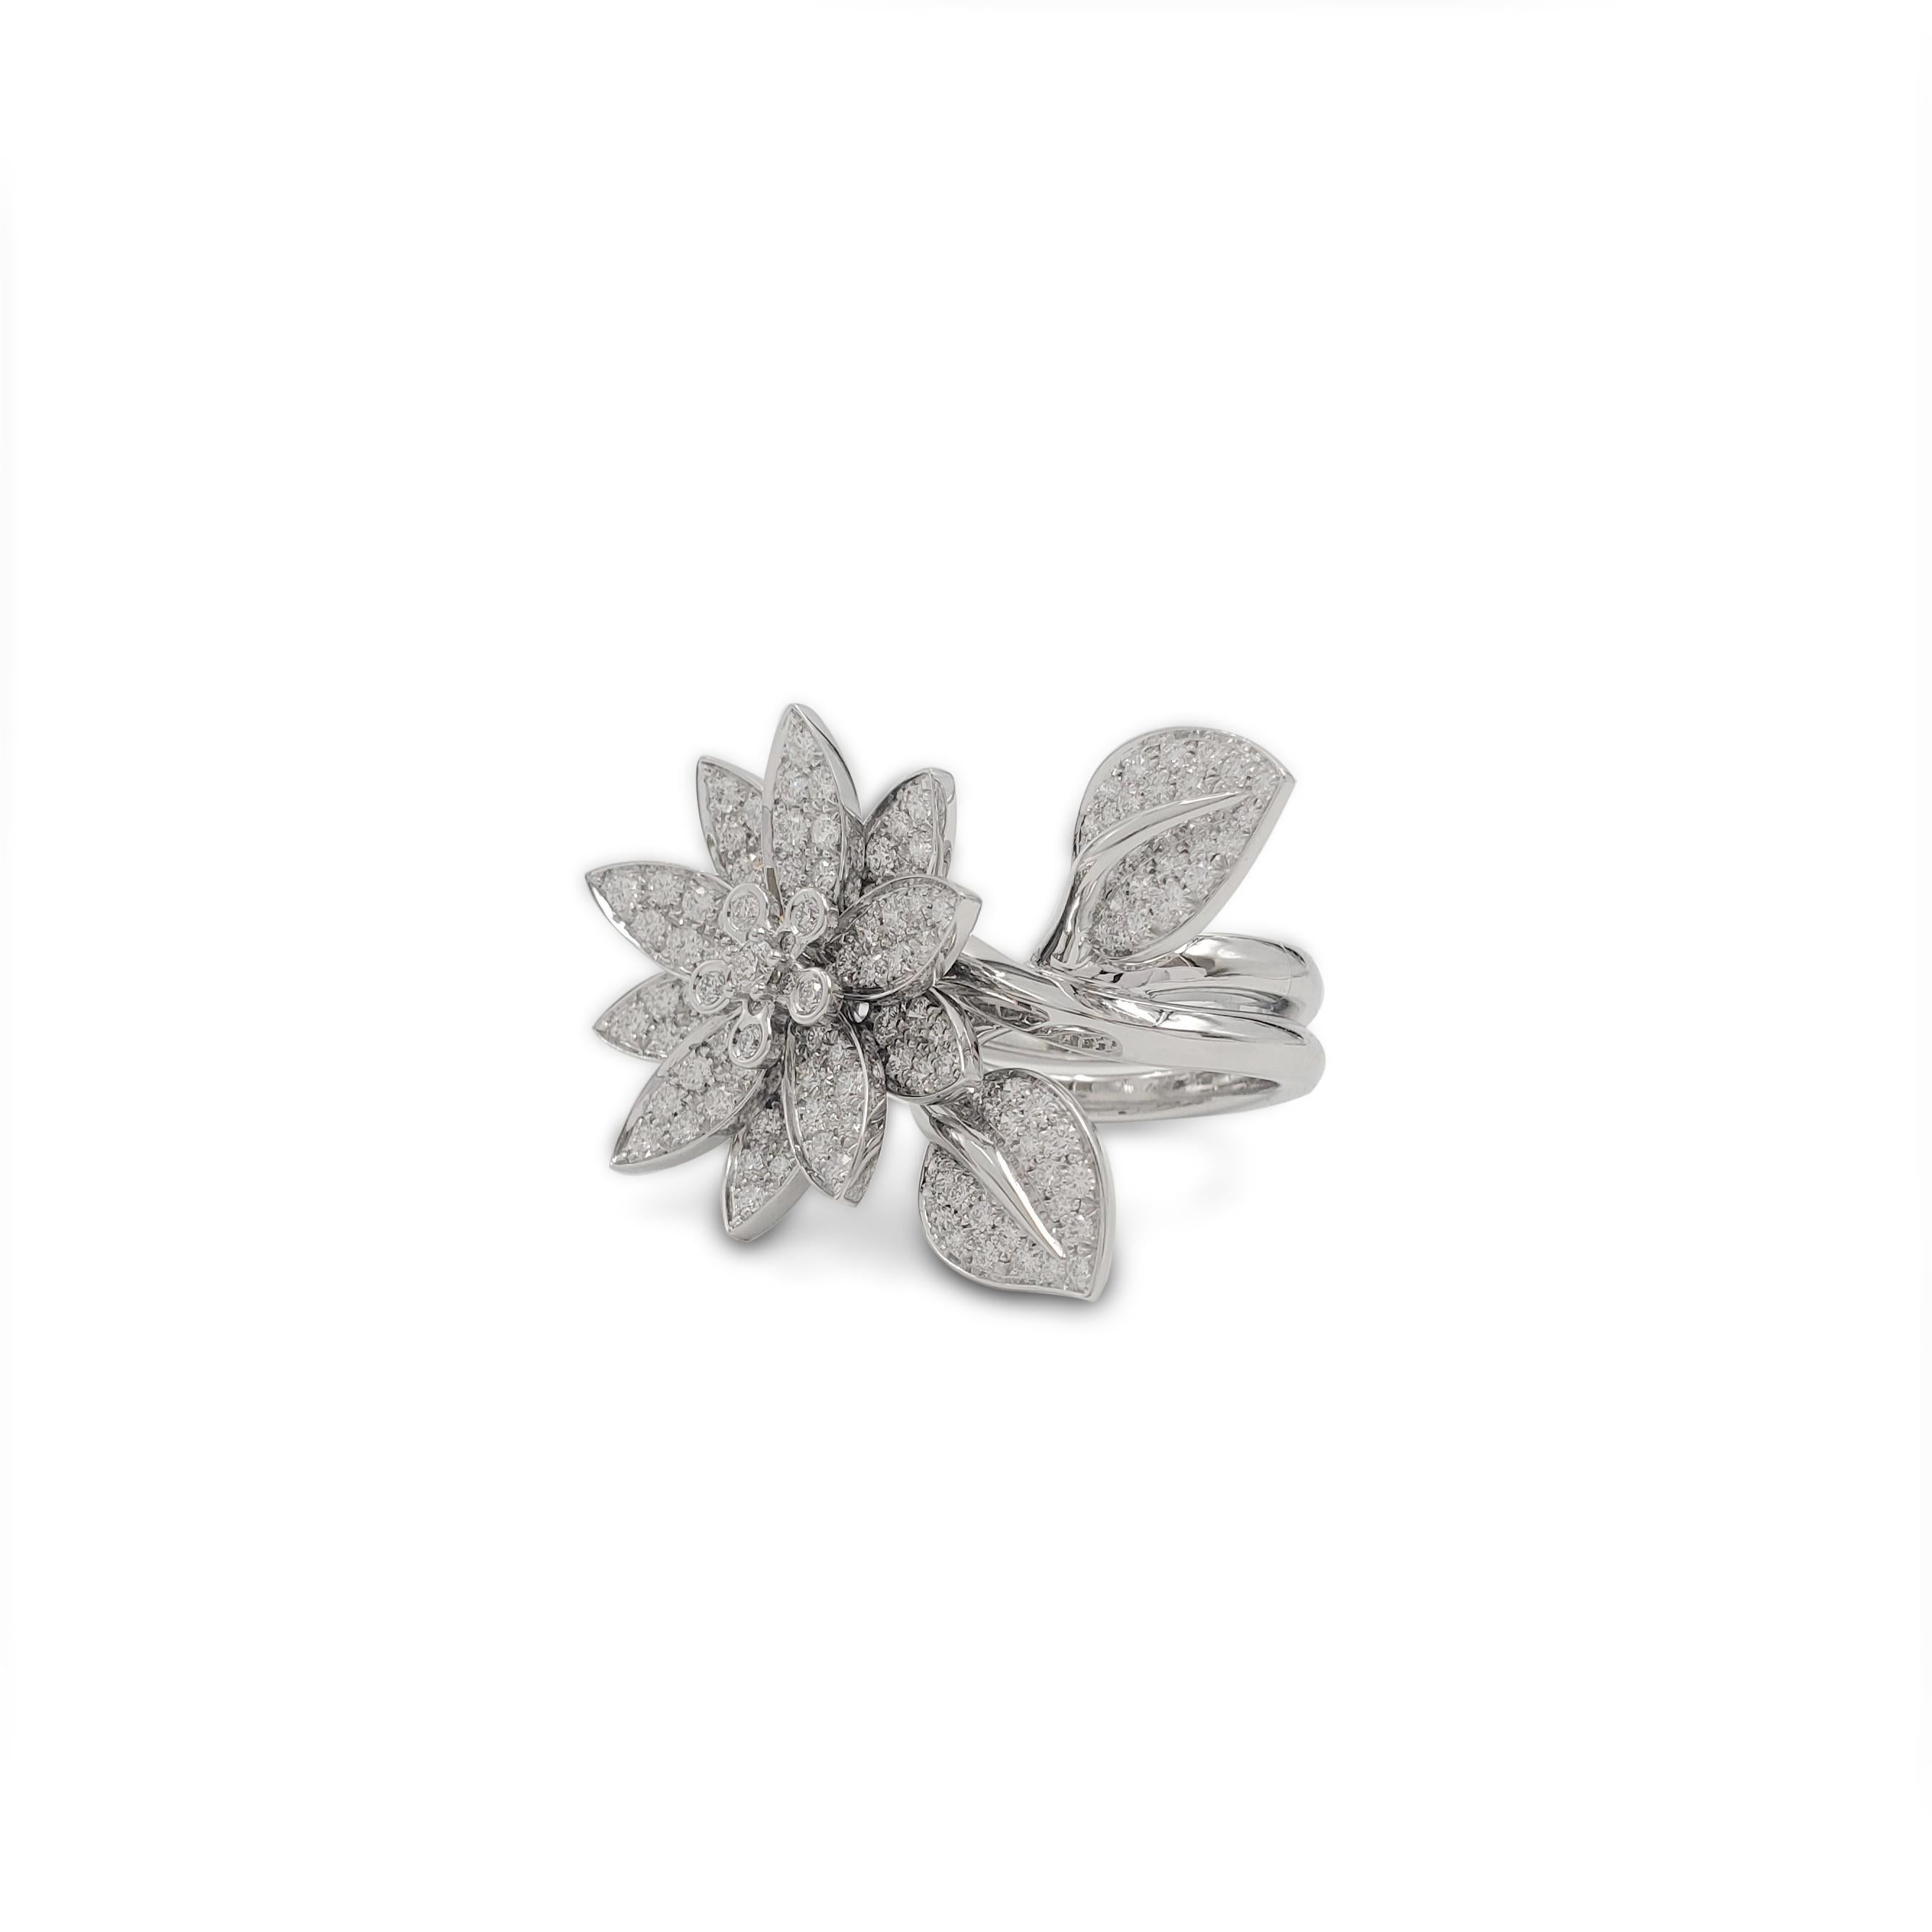 Authentic Van Cleef & Arpels 'Lotus' ring crafted in 18 karat white gold. This ring is comprised of a flower and two leaves that are pave set with sparkling round brilliant cut (G color, VS clarity) diamonds weighing an estimated 2.10 carats total.